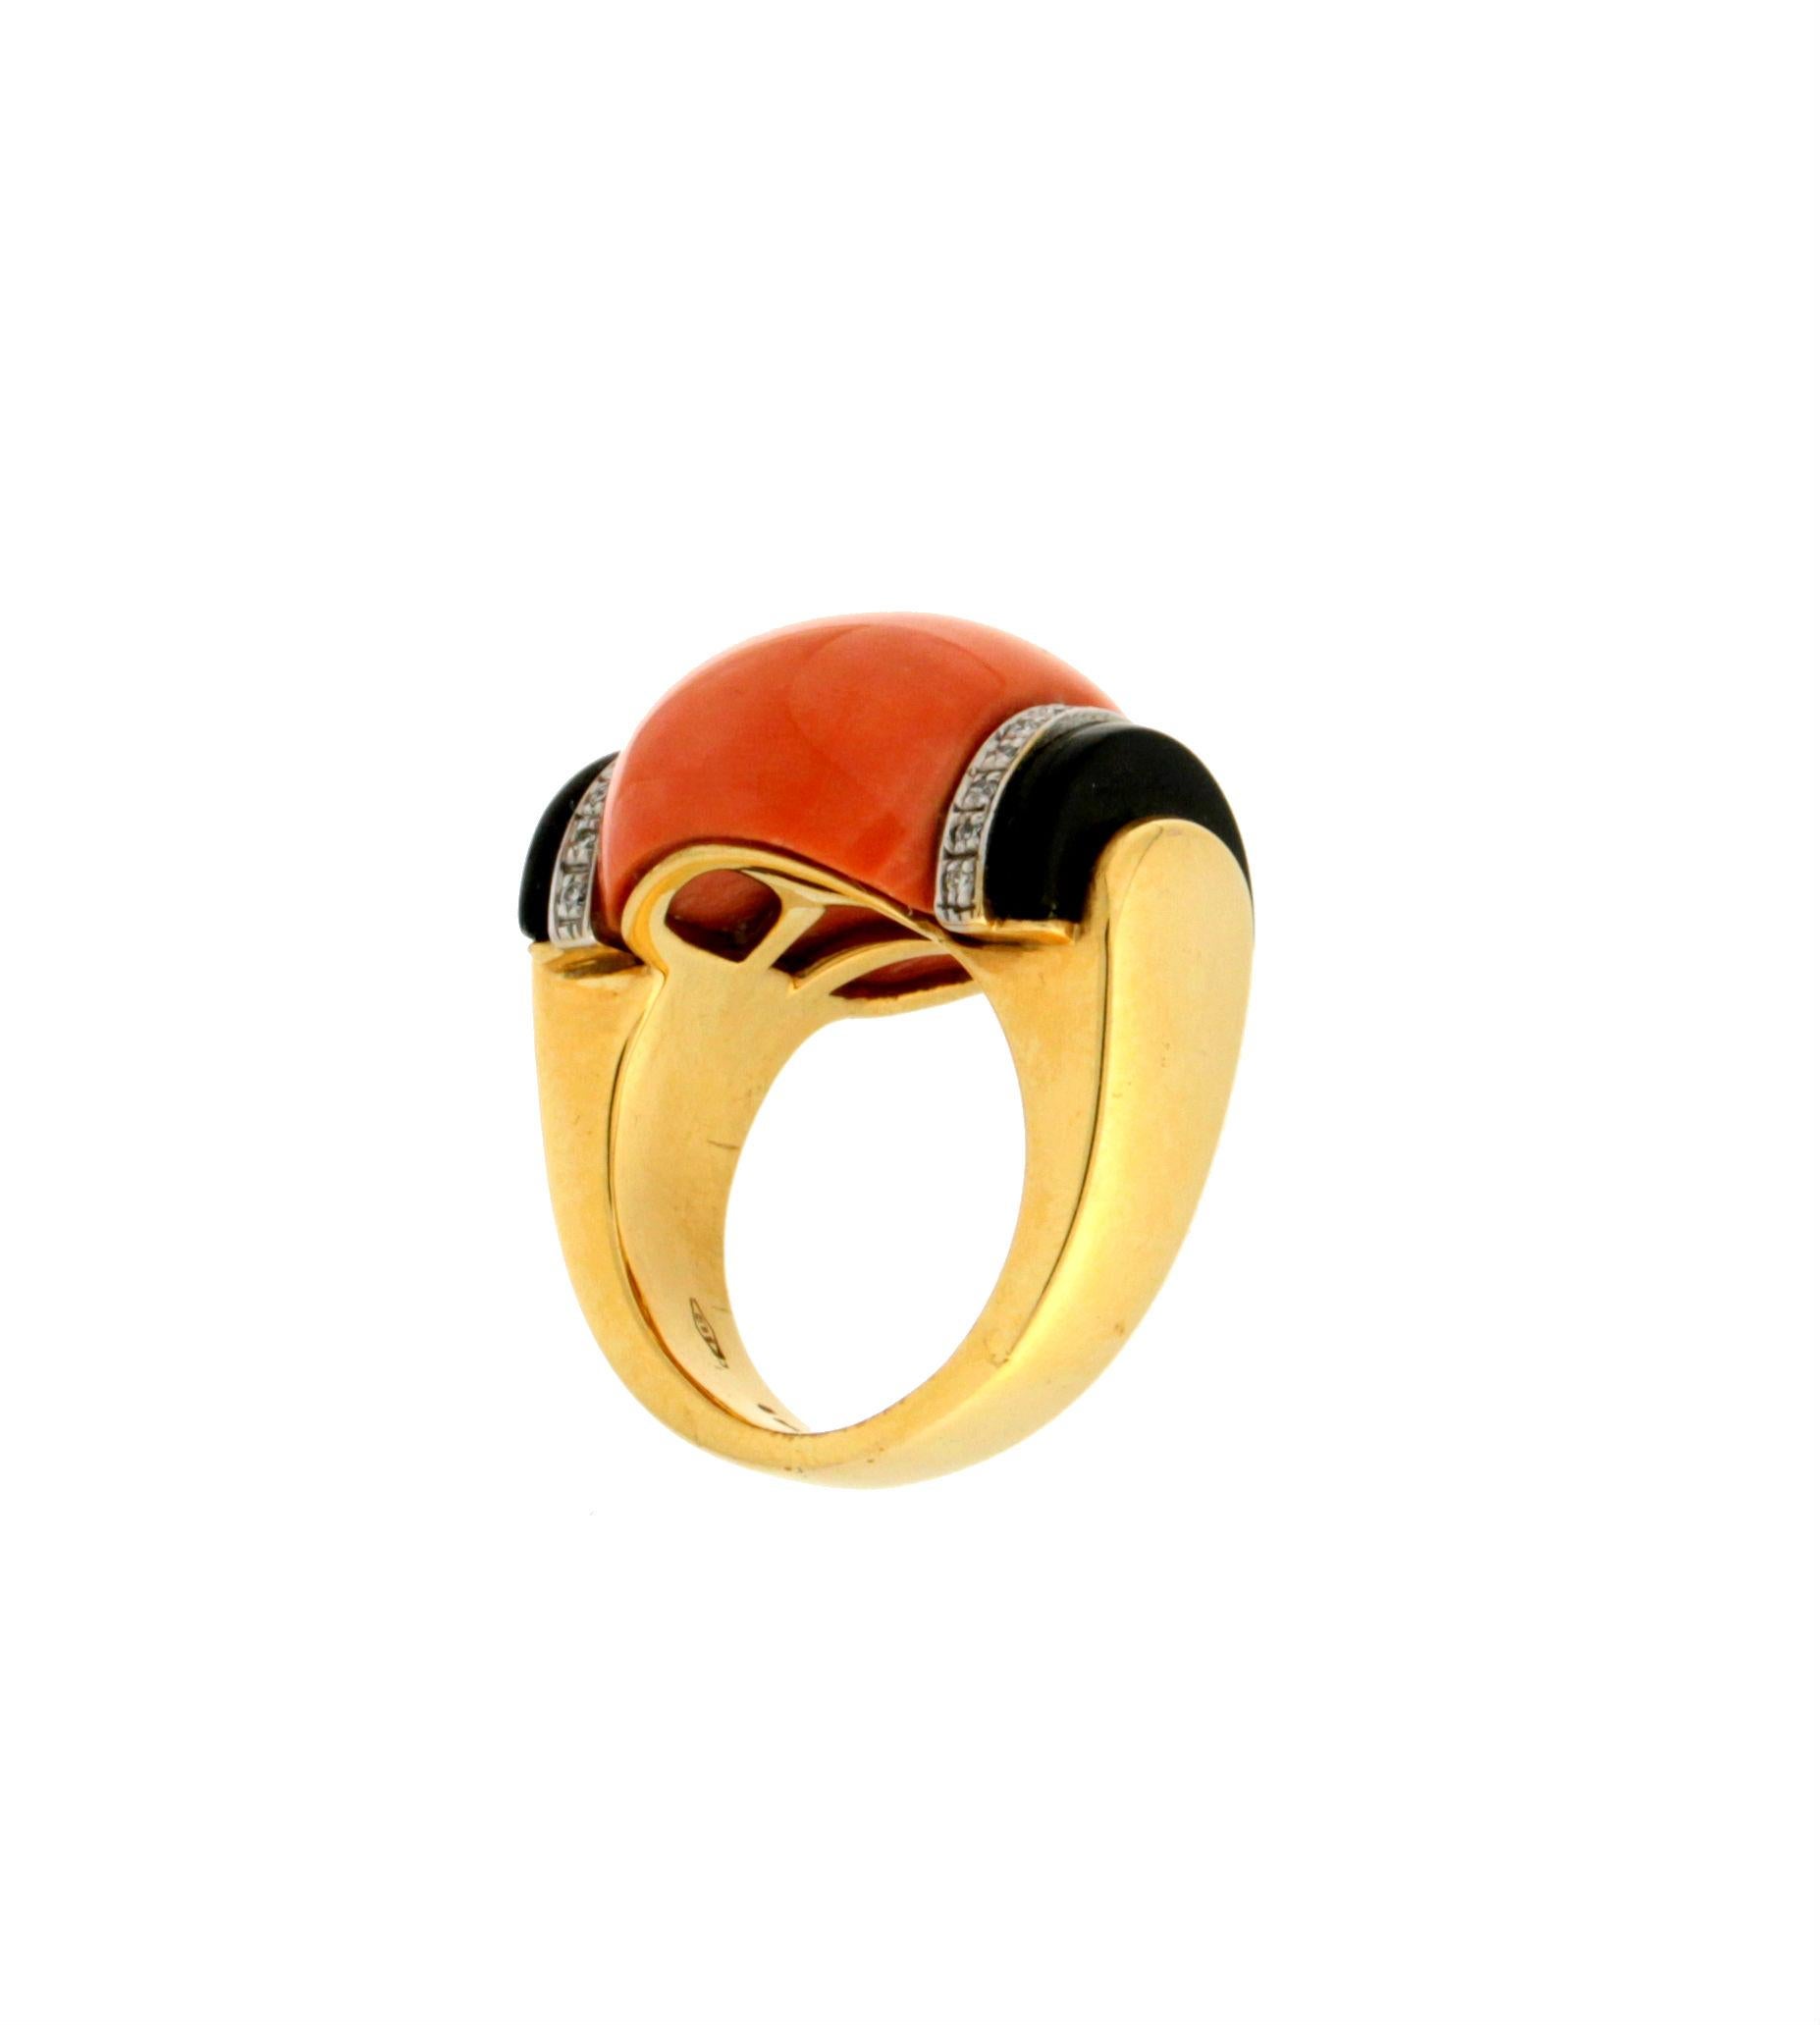 Brilliant Cut Handcraft Coral 14 Karat Yellow and White Gold Onyx Diamonds Cocktail Ring For Sale